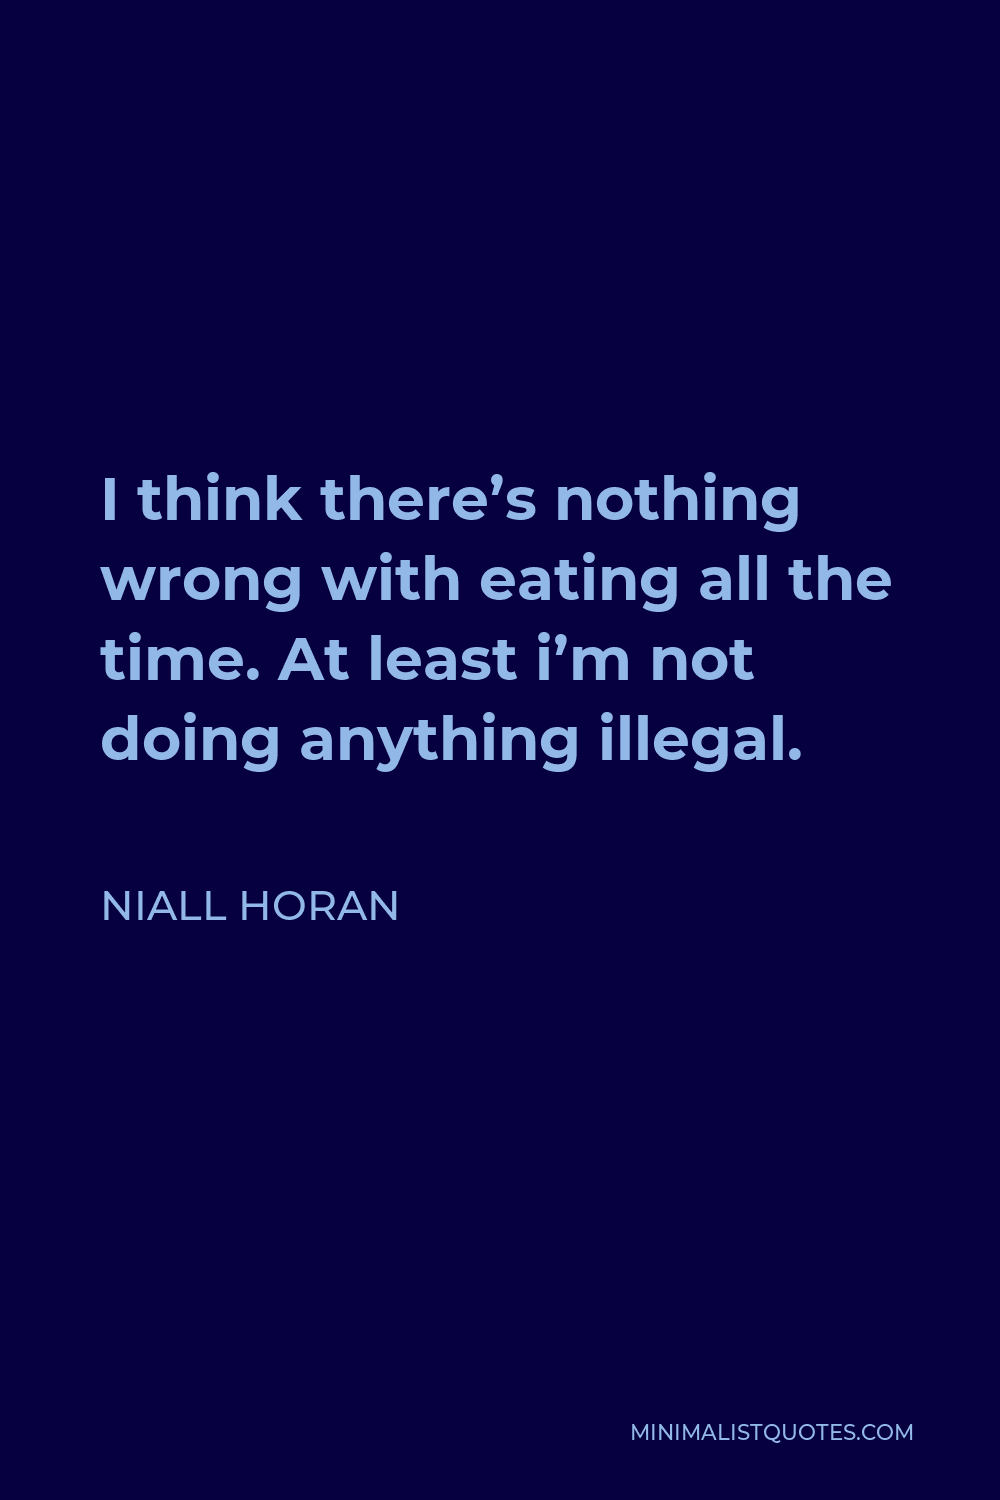 Niall Horan Quote - I think there’s nothing wrong with eating all the time. At least i’m not doing anything illegal.